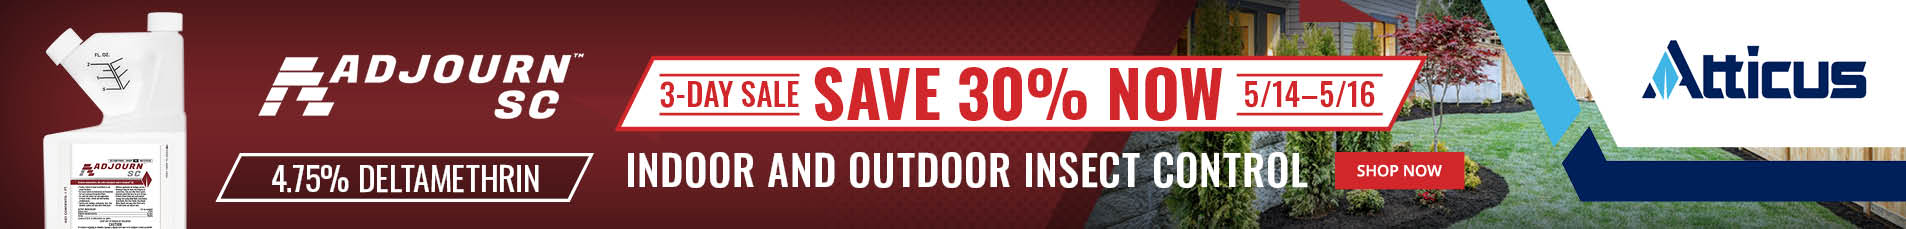 3-Day Sale - Save 30% Now on Adjourn SC Indoor and Outdoor Insect Control